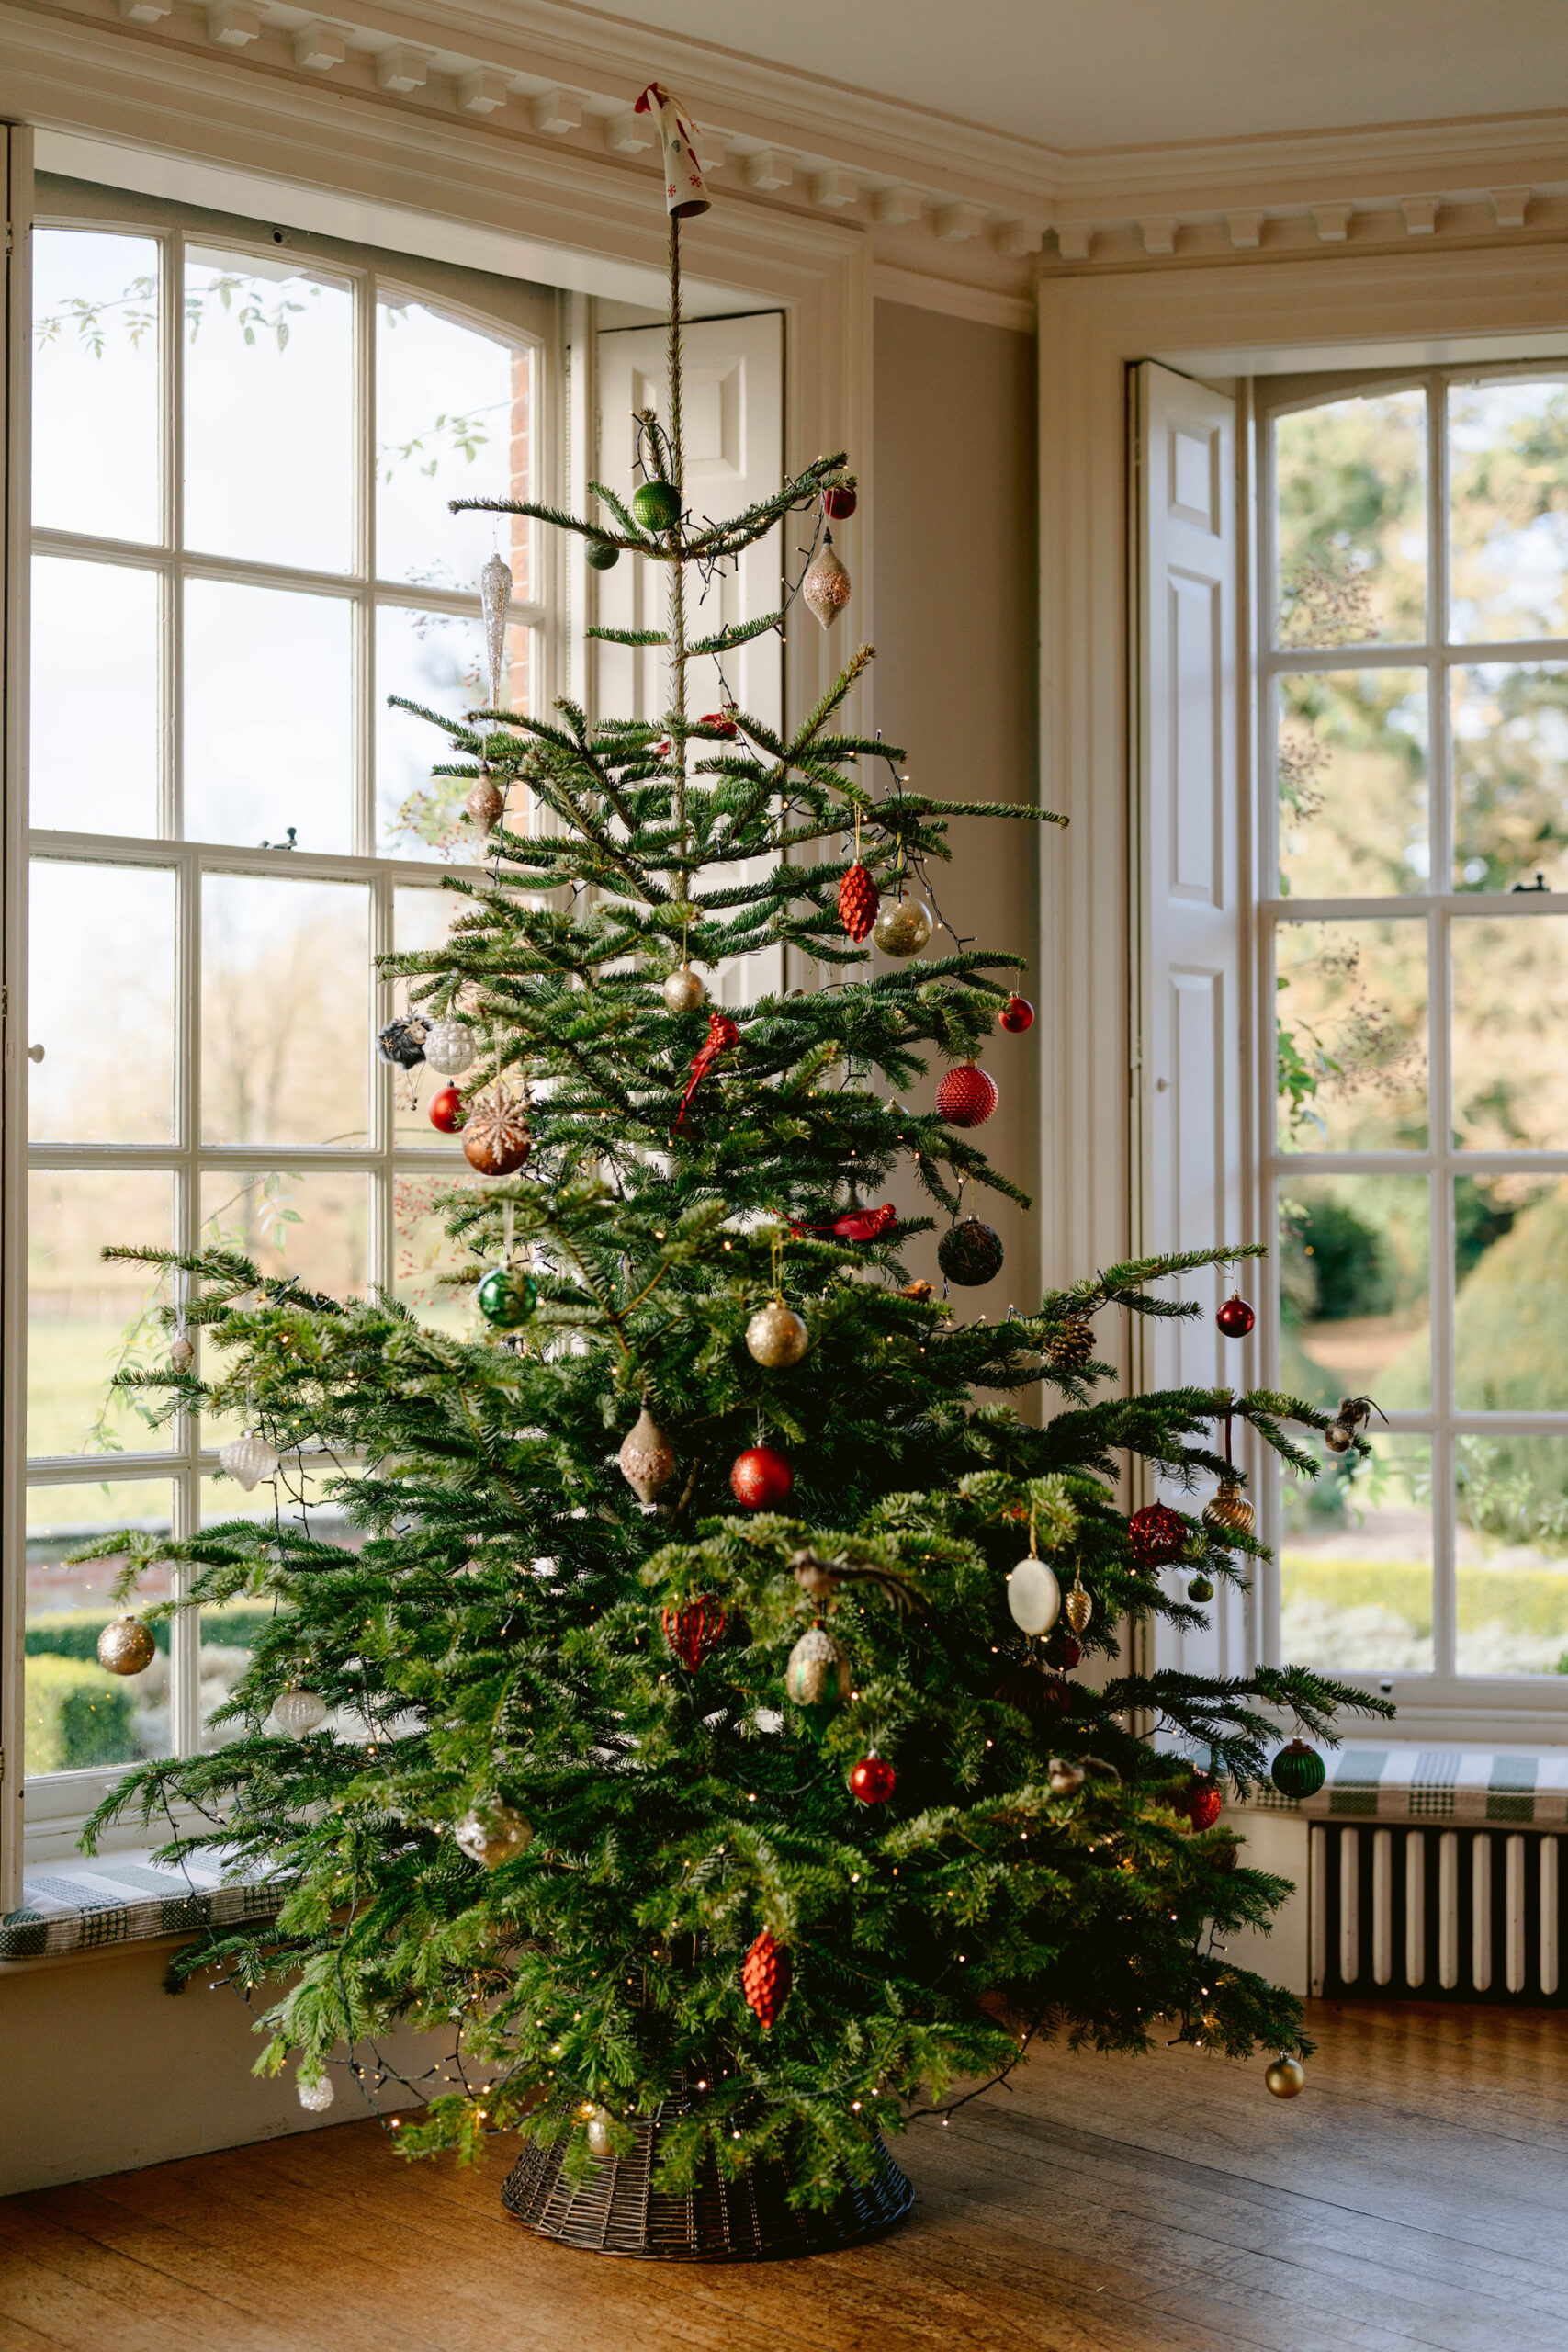 An image of a Christmas tree decked out in red and gold baubles with a backdrop of two Georgian sash windows with original shutters situated behind the tree looking out onto landscaped gardens.